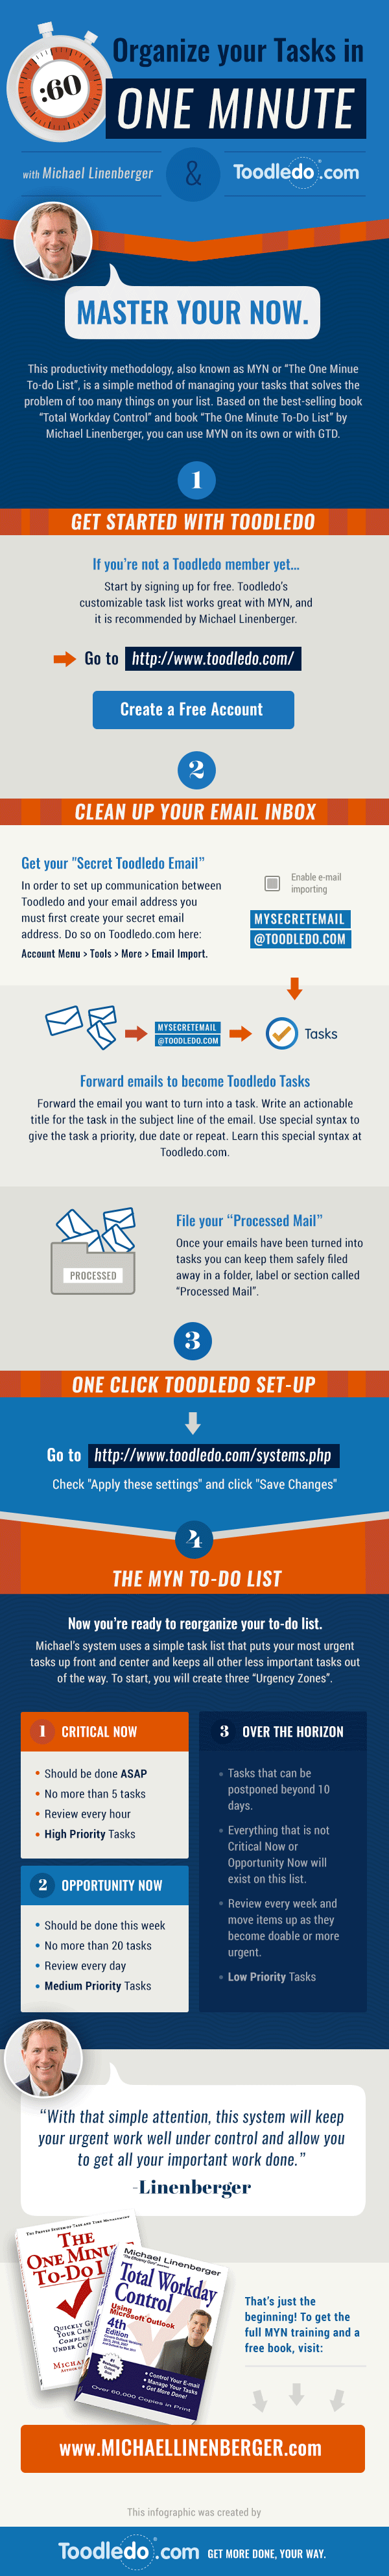 Learn how to organize your tasks in one minute with Toodledo's helpful MYN Time Management Infographic.